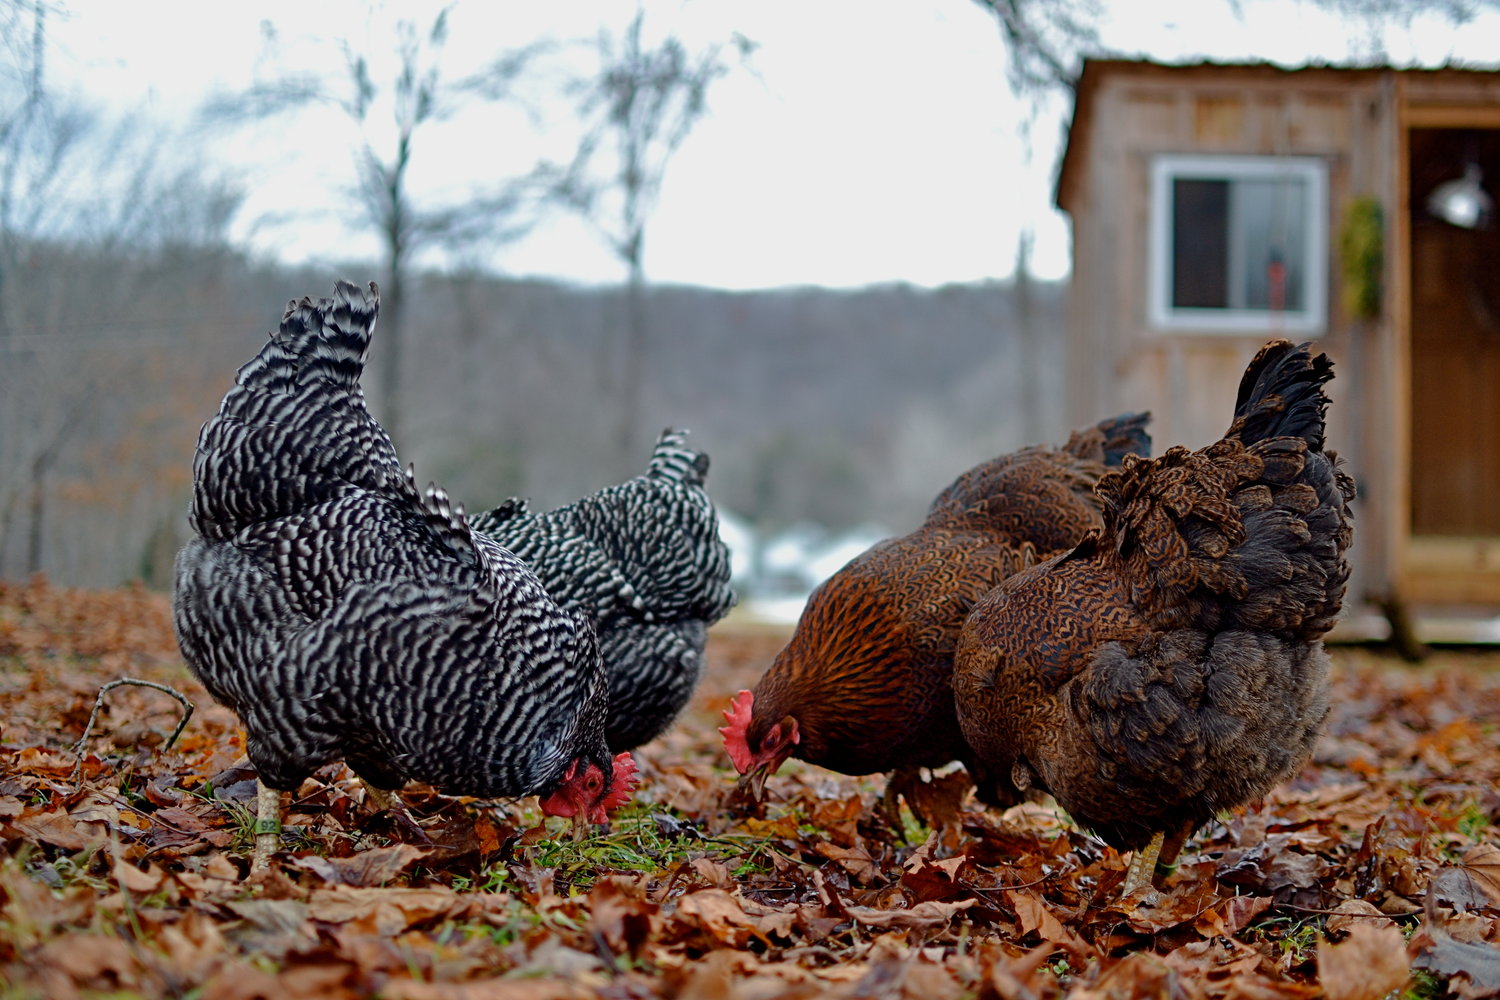 There’s nothing like seeing your chickens free-ranging. Here are Gertie McGhee and Little Girl, the two Barred Rocks, on the left. Clare E. Clare and Elsie, two Partridge Rocks, are on the right, trying to find the best worms.